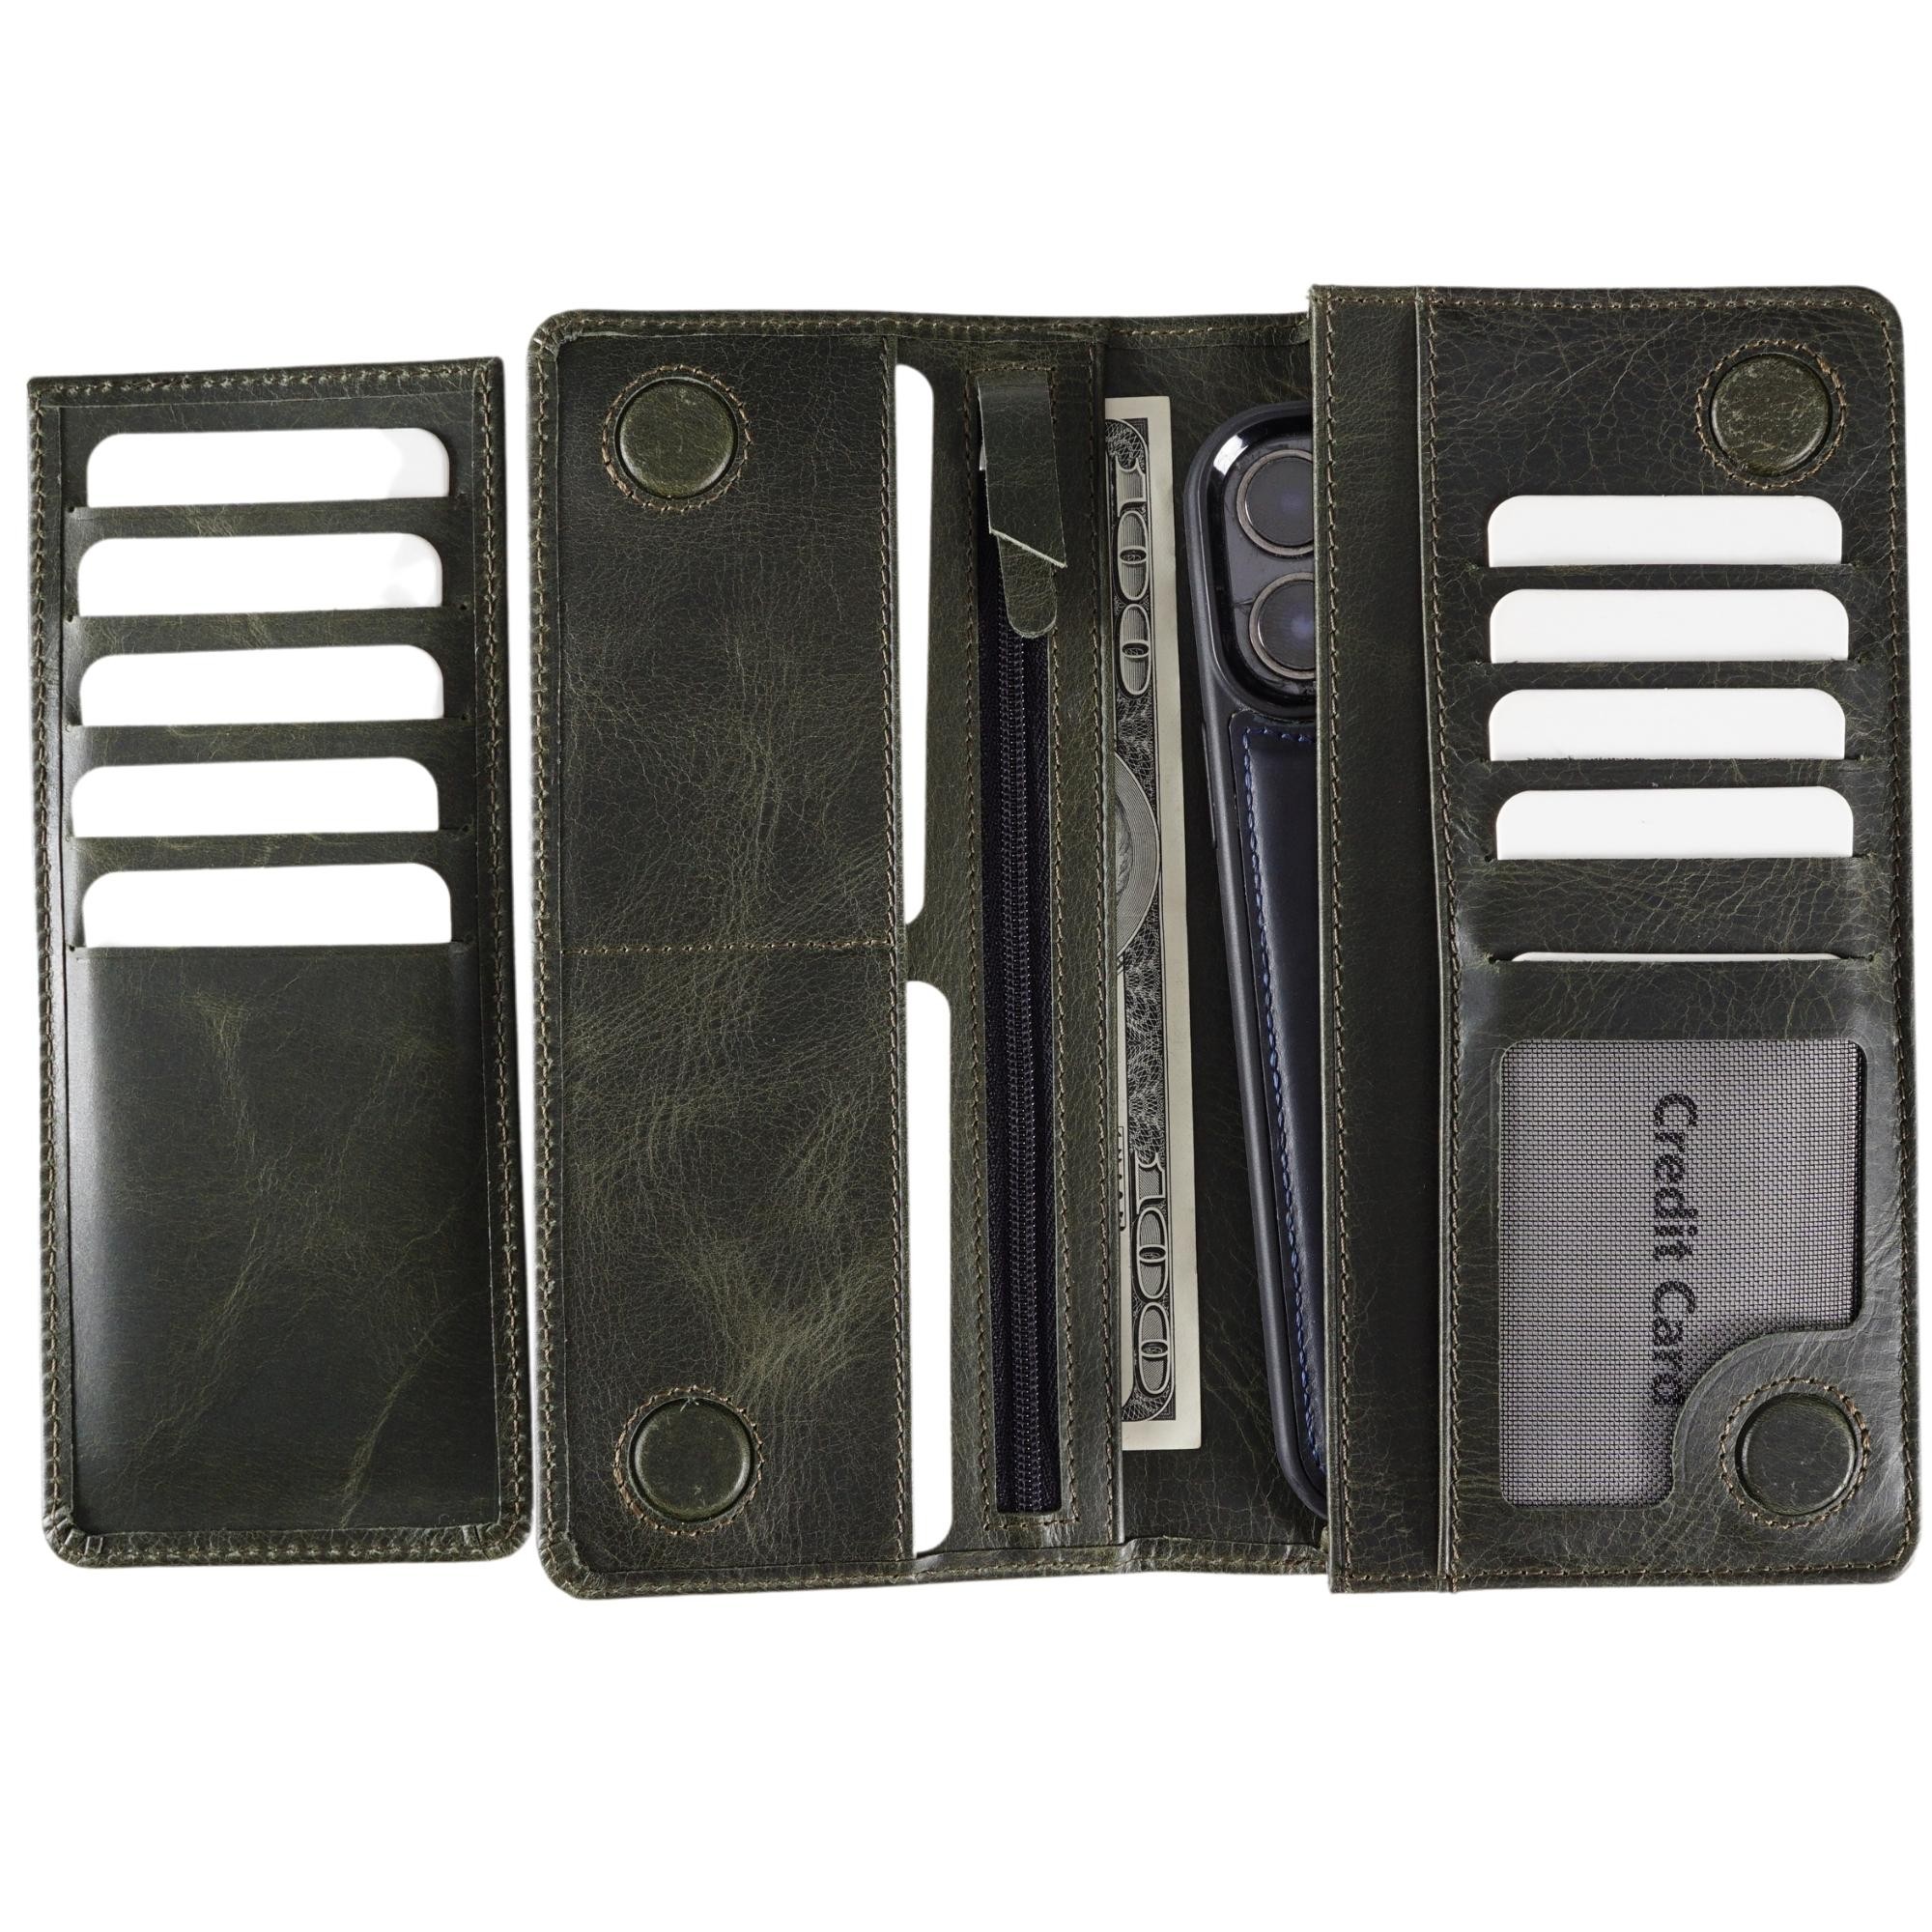 Genuine Leather Wallet with Phone - Green